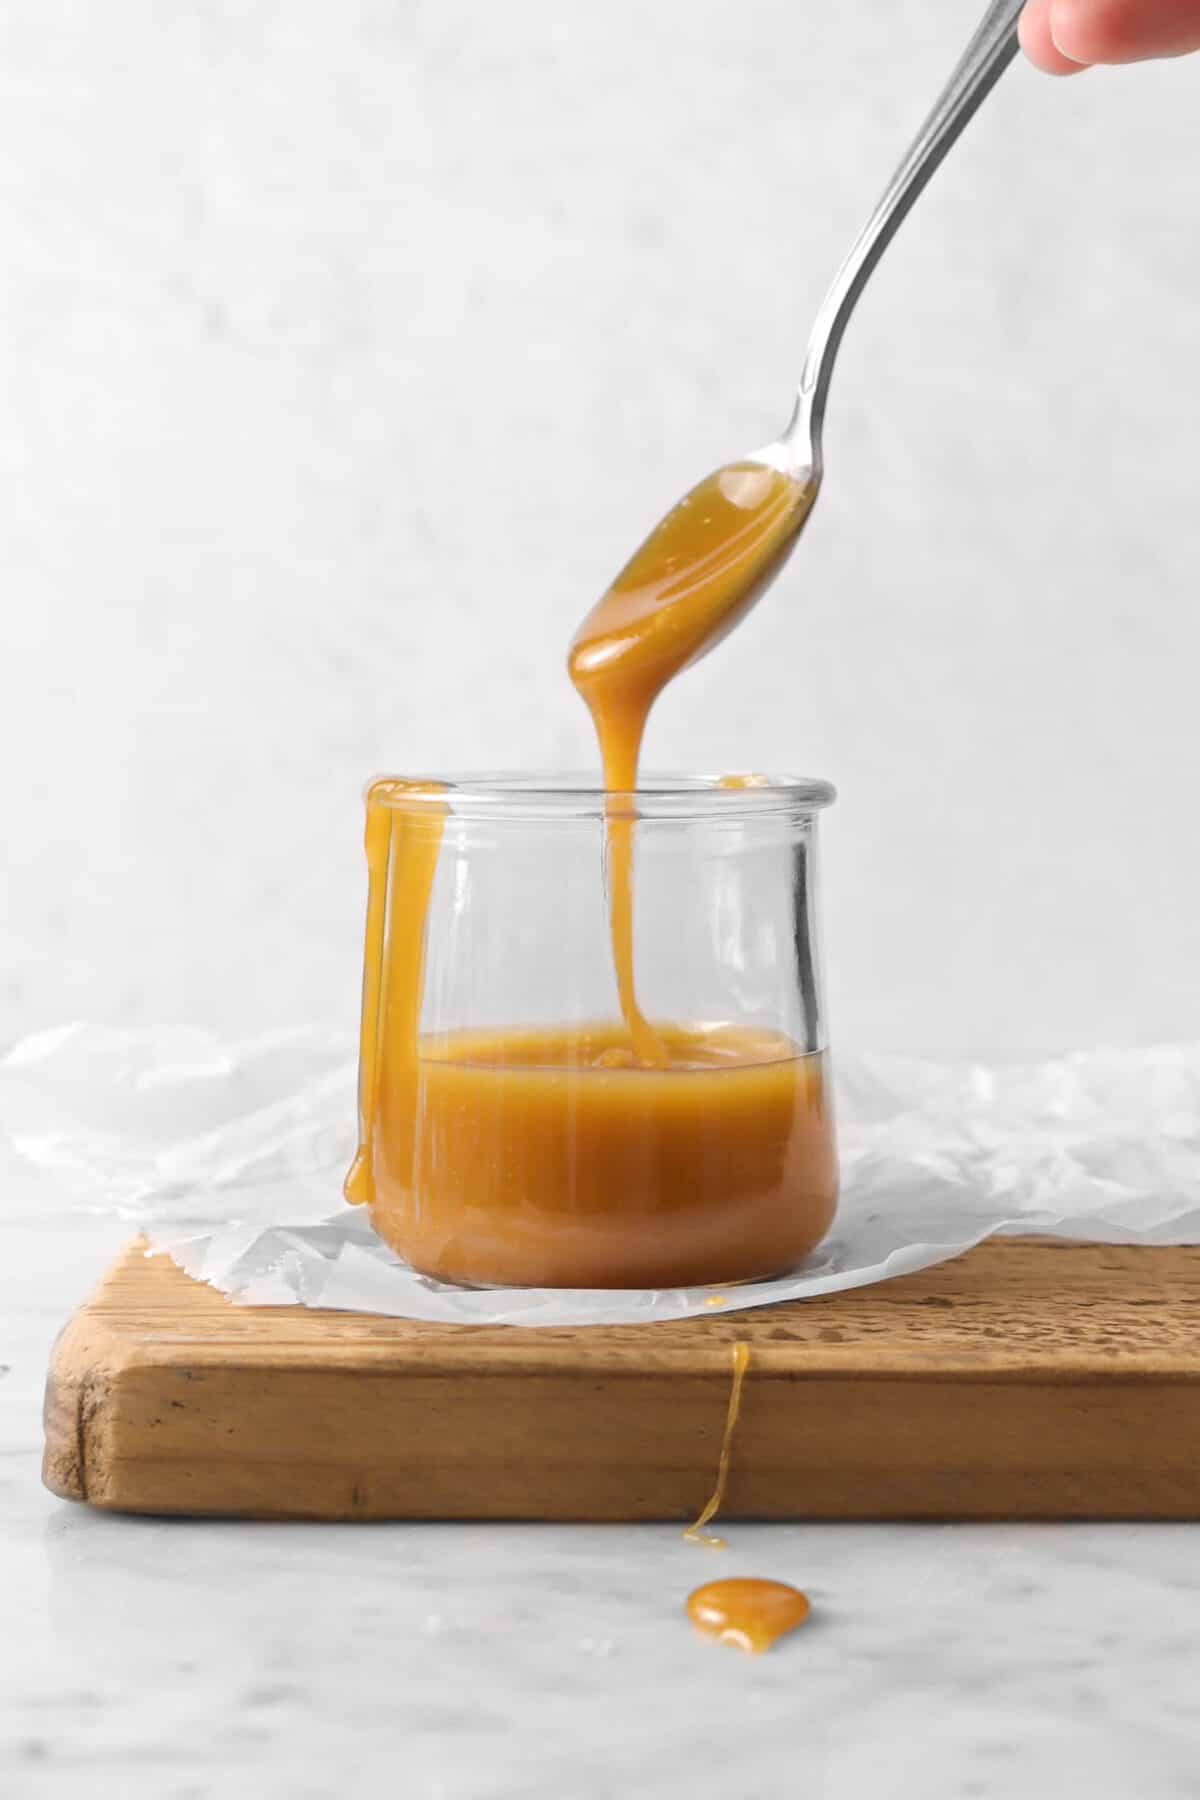 a spoon with caramel sauce running off it into a jar